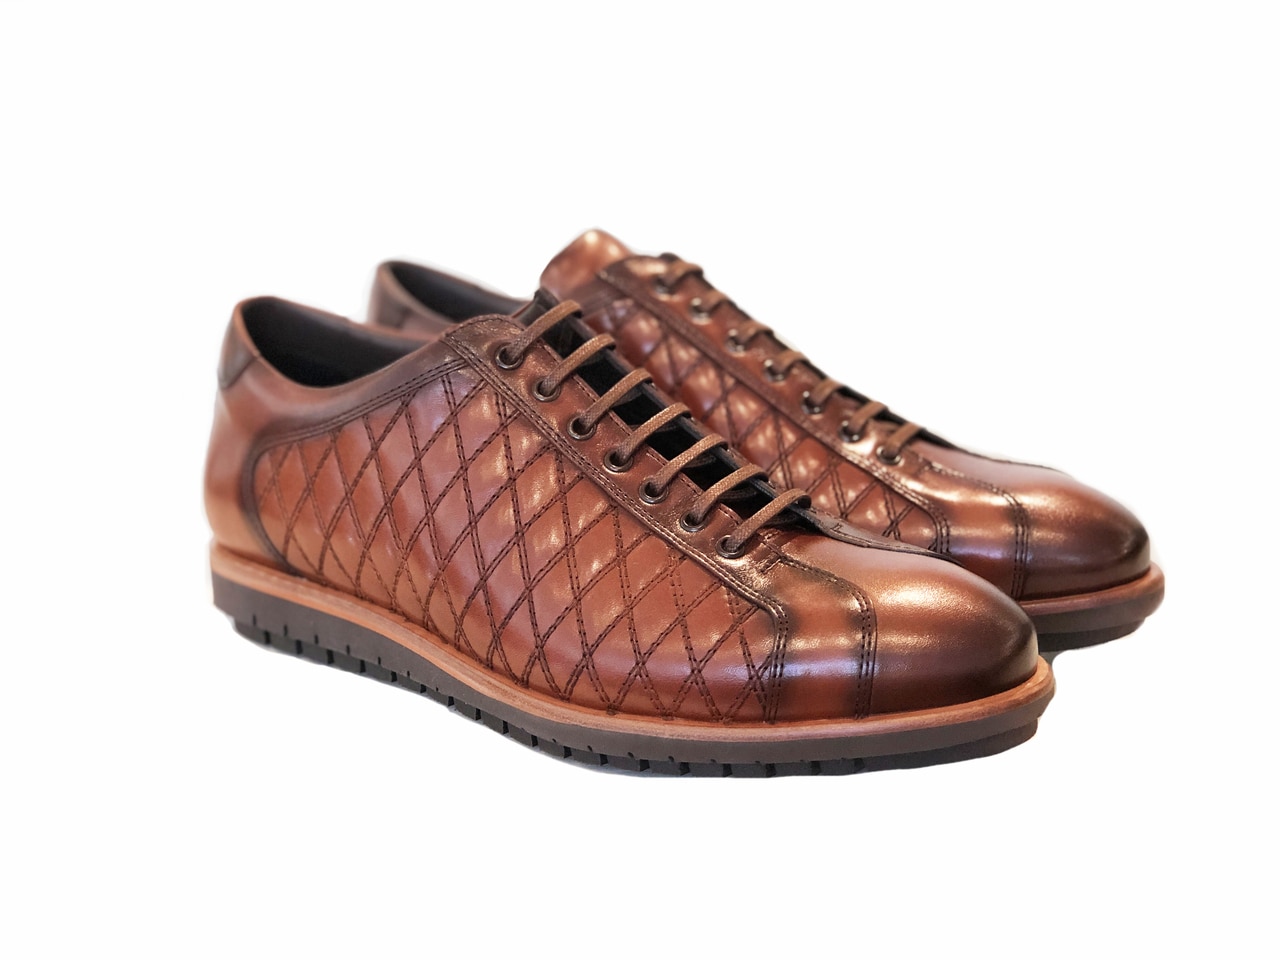 Men's Fashion Sneakers Corrente 4005 Quilted Dress/Casual Leather Shoes Brown 